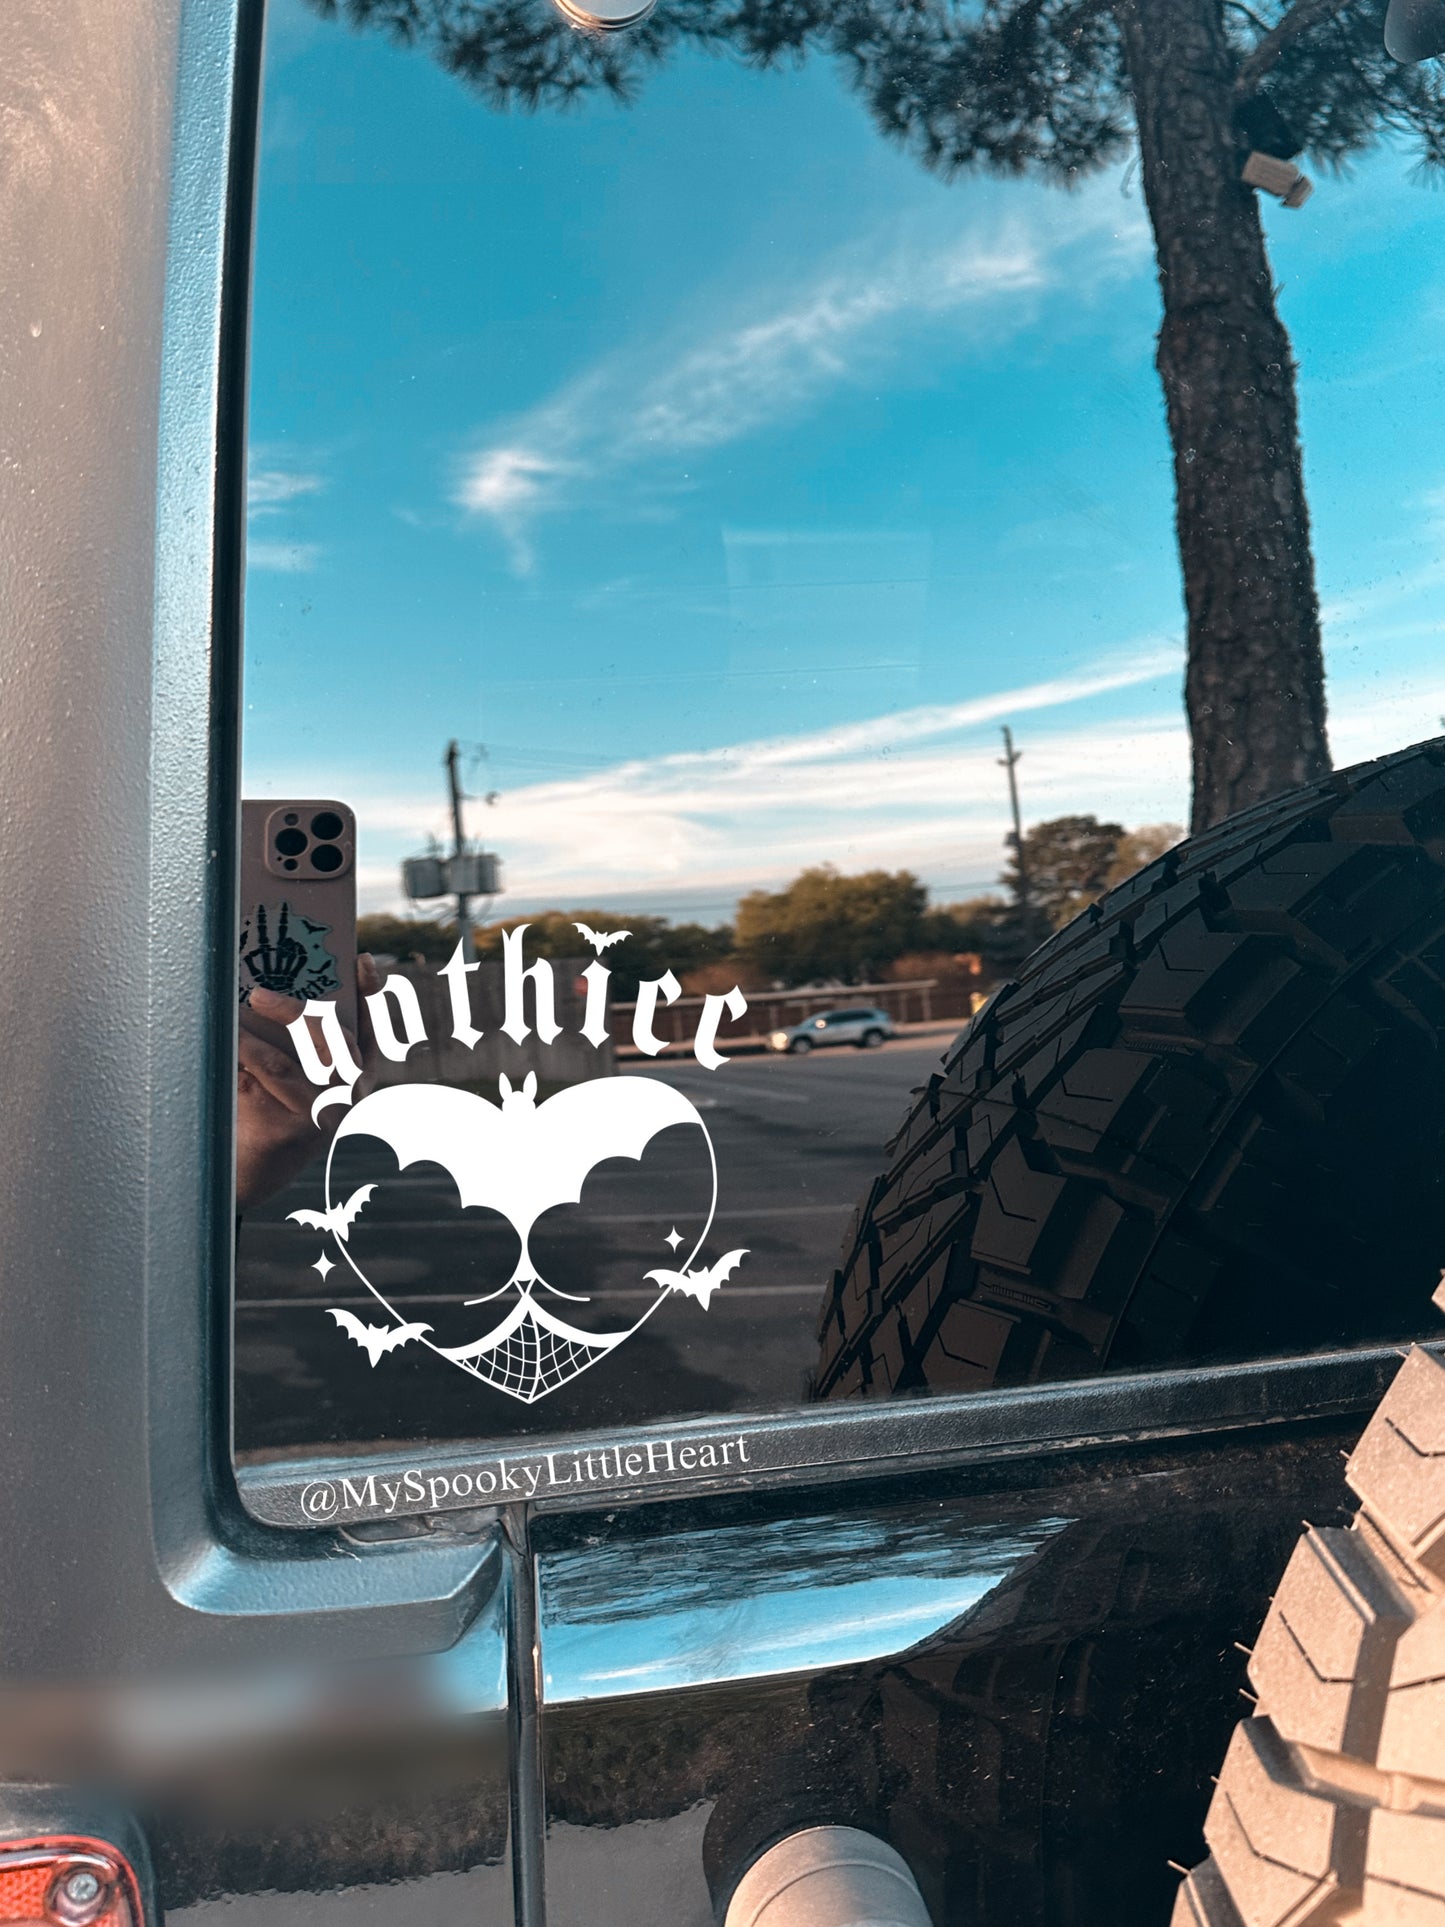 Gothicc with bats Vinyl Decal